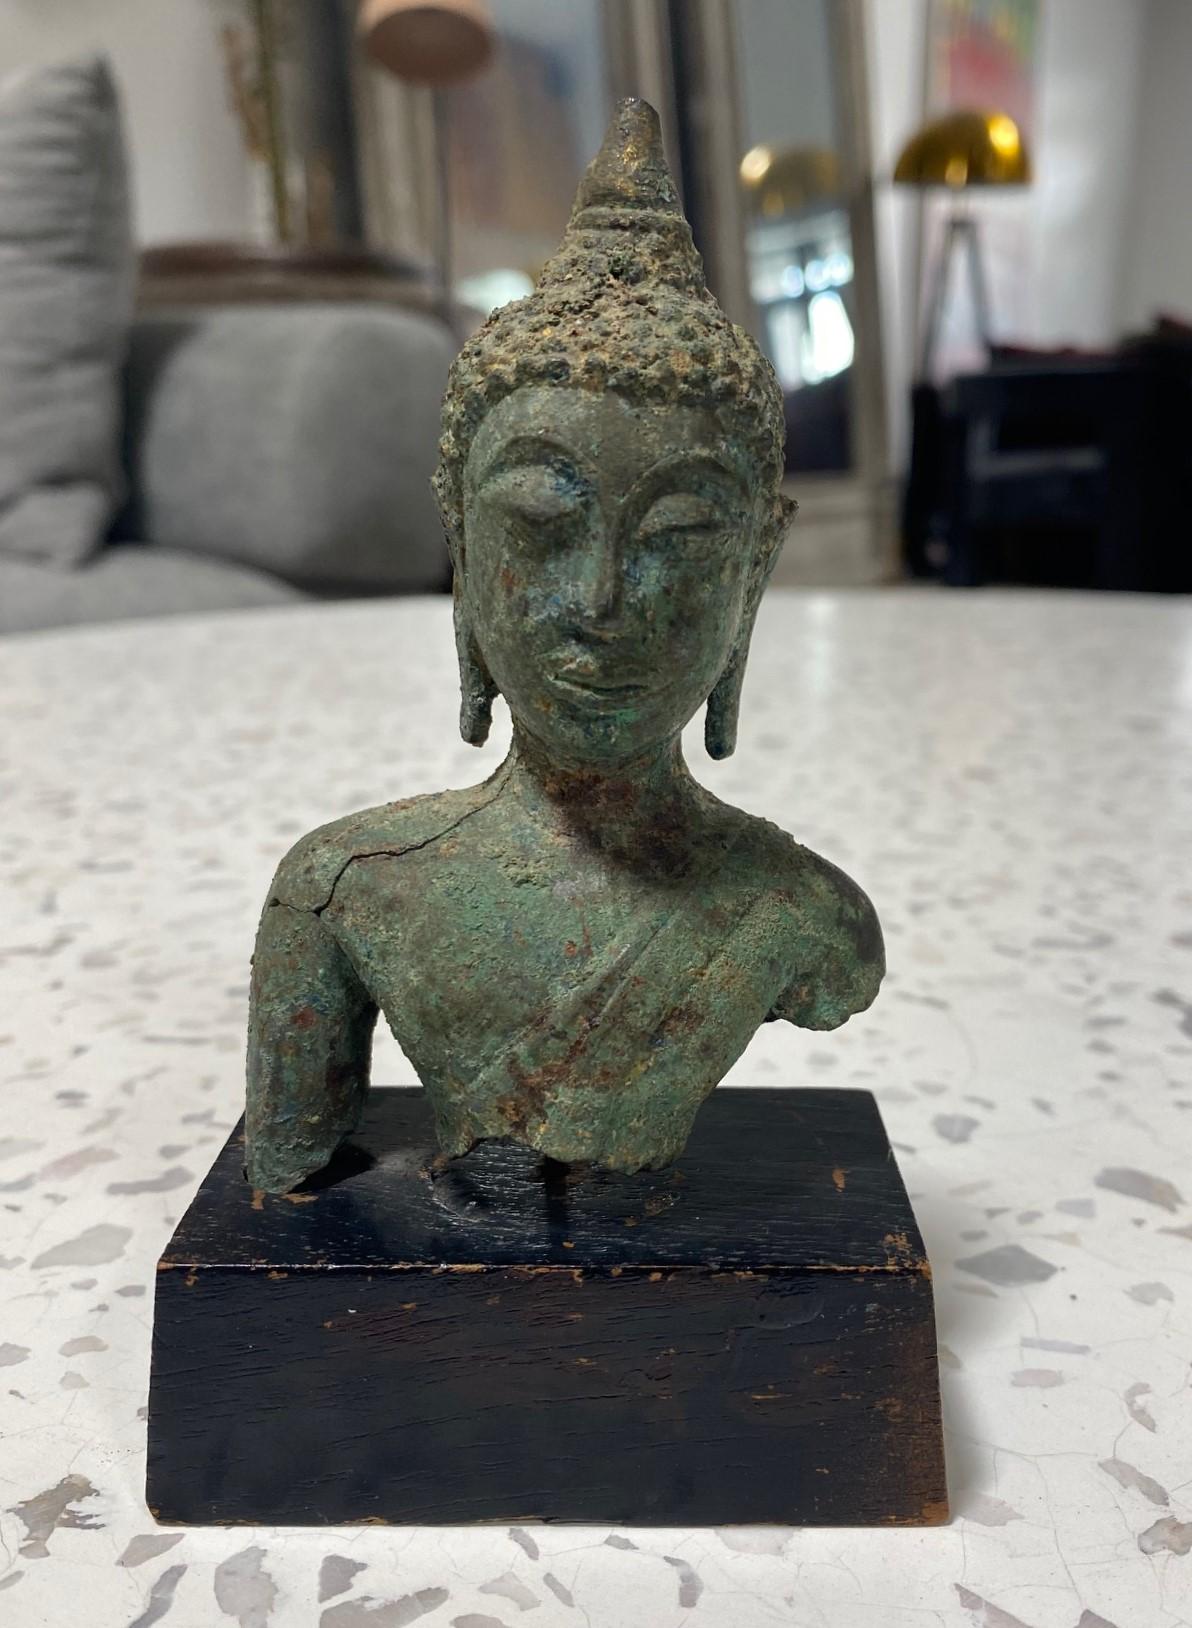 A beautifully sculpted Thai/ Siam Southeast Asian bronze Buddha head on a custom wood stand. The Buddha's eyes are closed in serene meditation. This beautiful gem has a wonderful feel and heft to it. Very well well crafted with a gorgeous natural